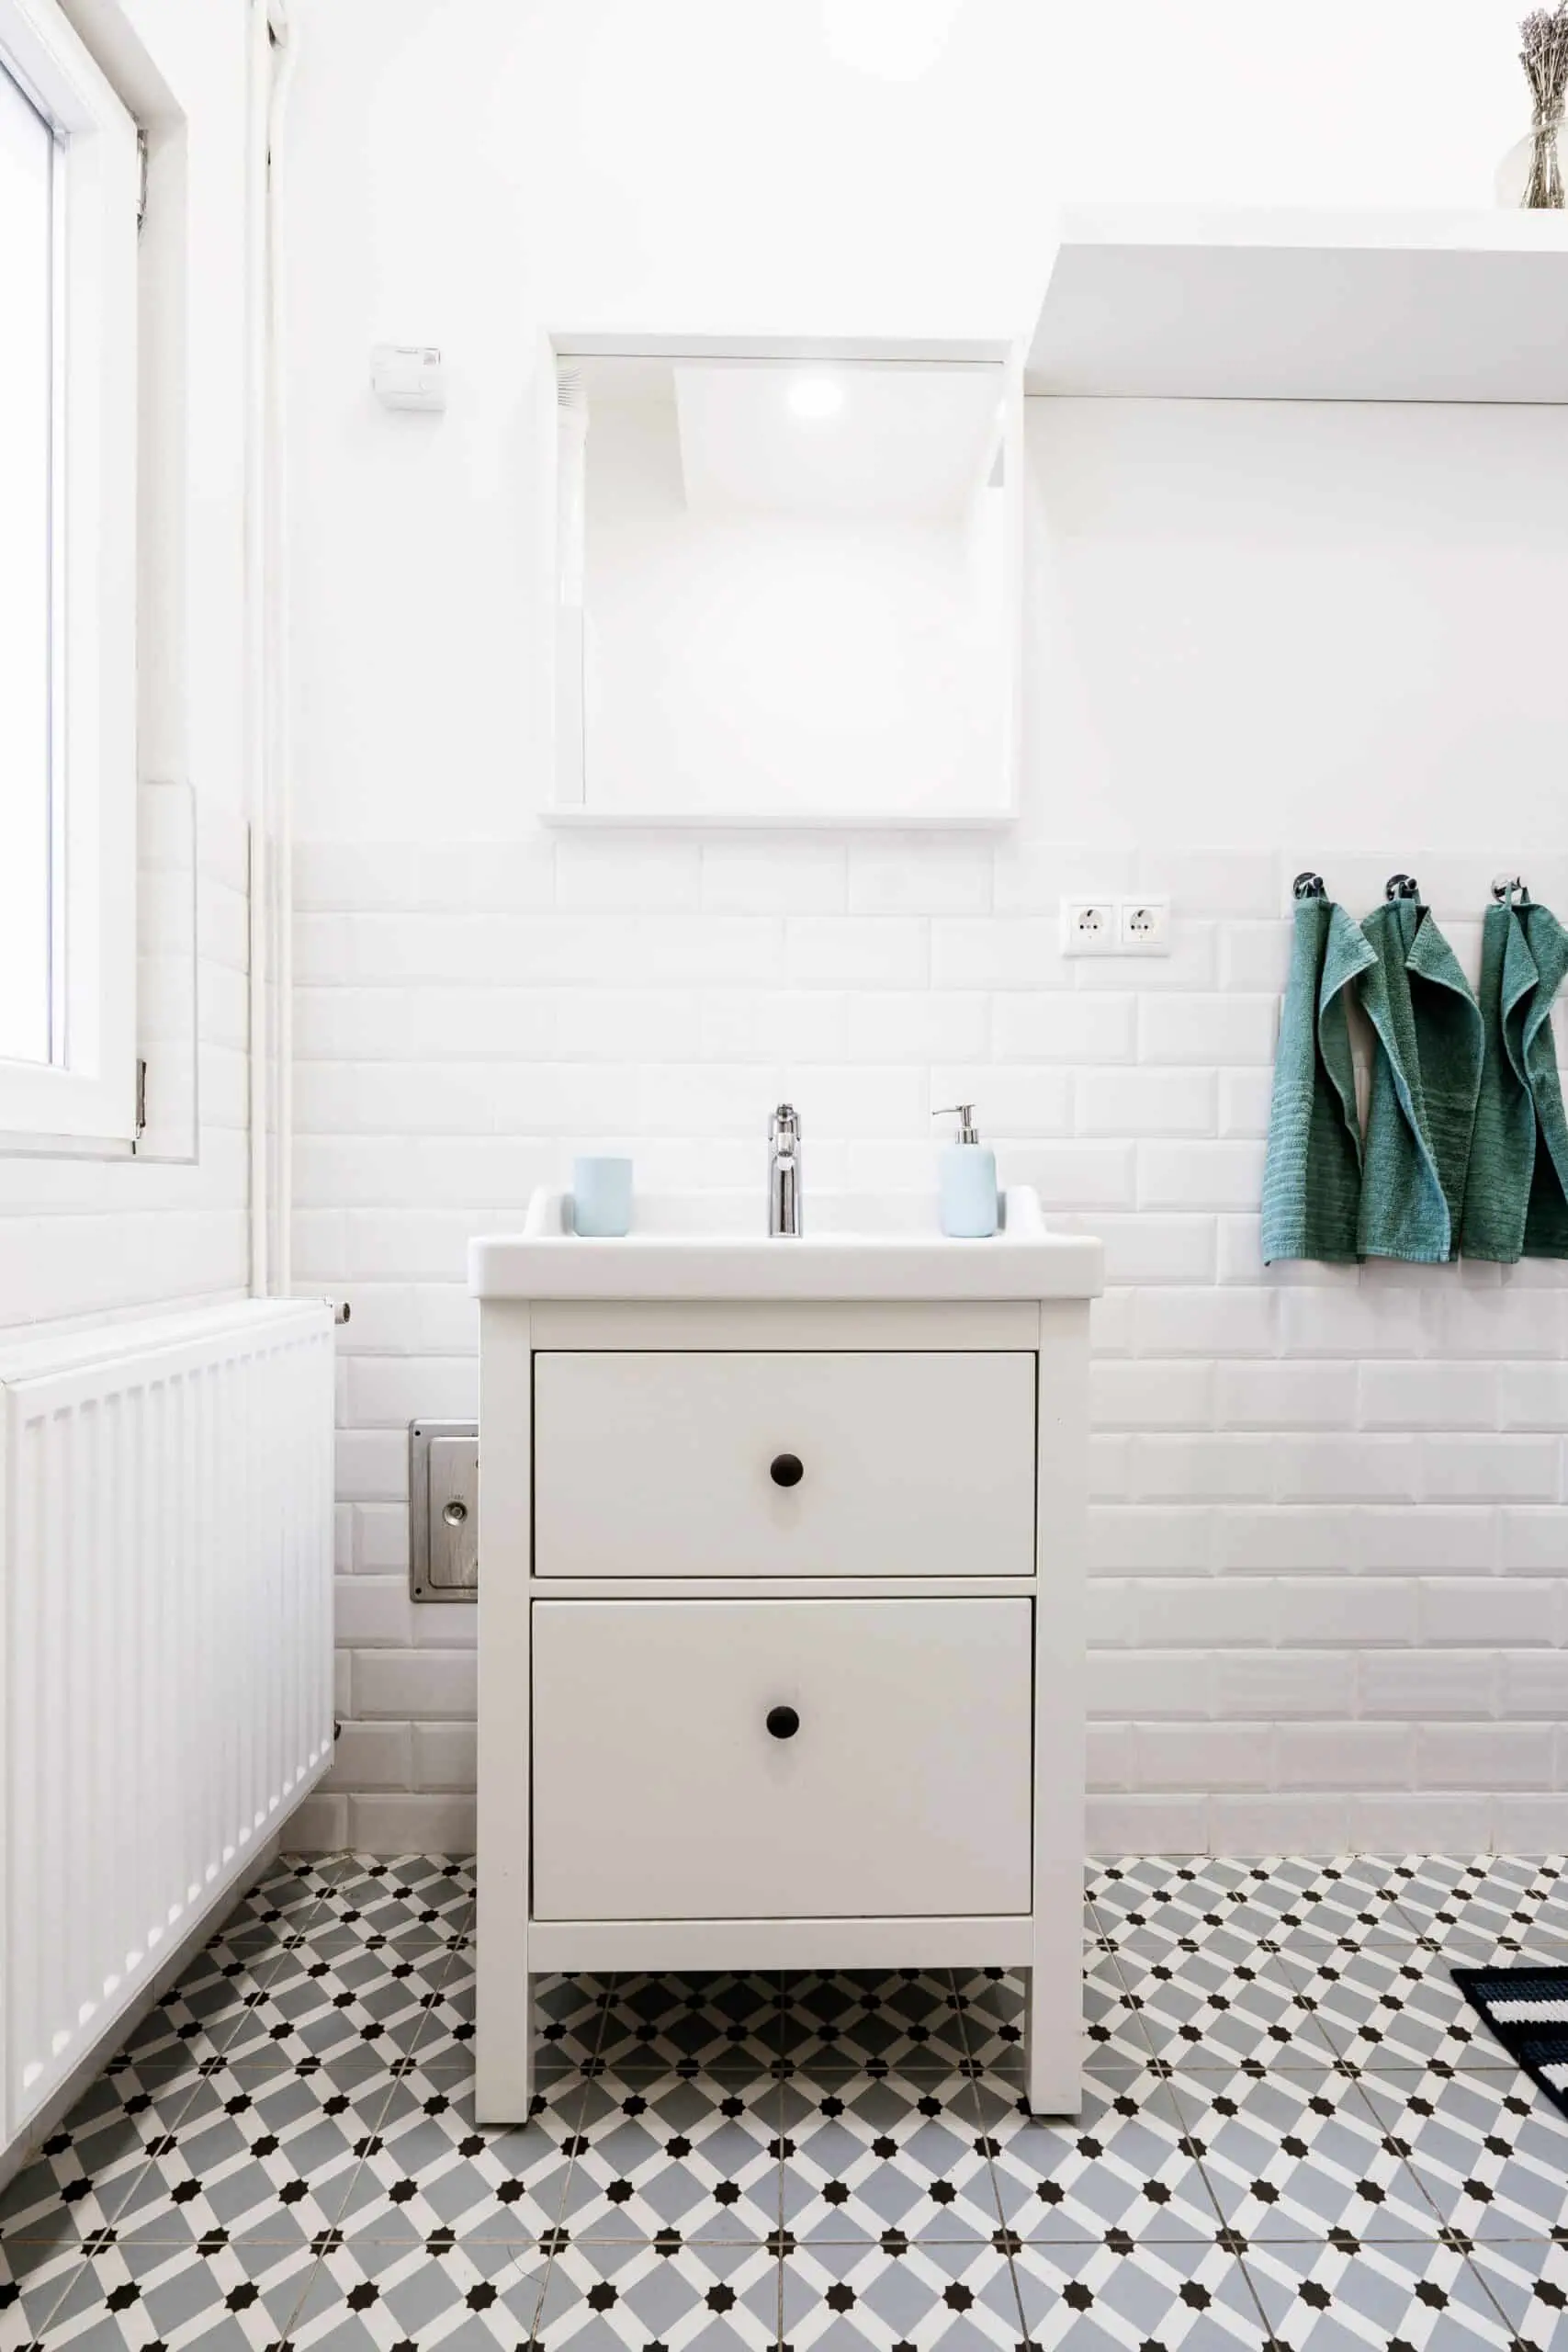 Store Room To Spa: How To Organize Your Bathroom And Make It Into A Sanctuary